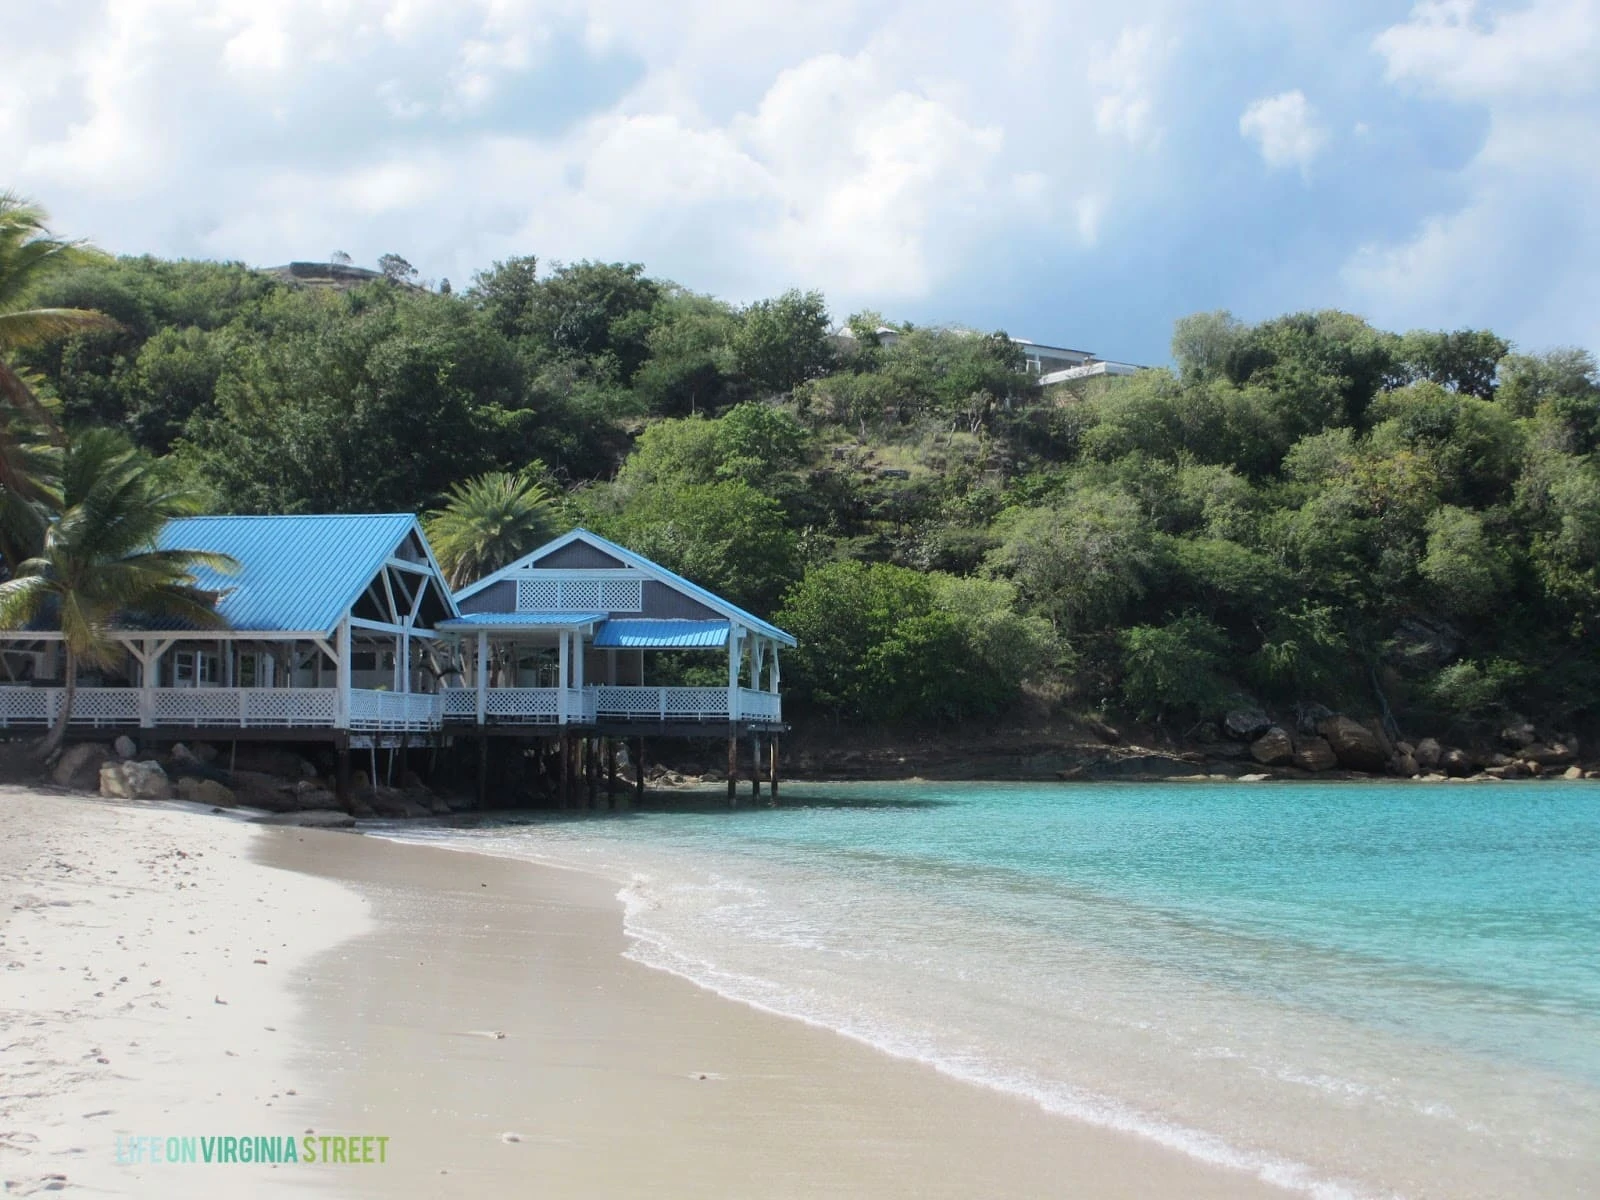 A house on stilts by the shore in the Caribbean.